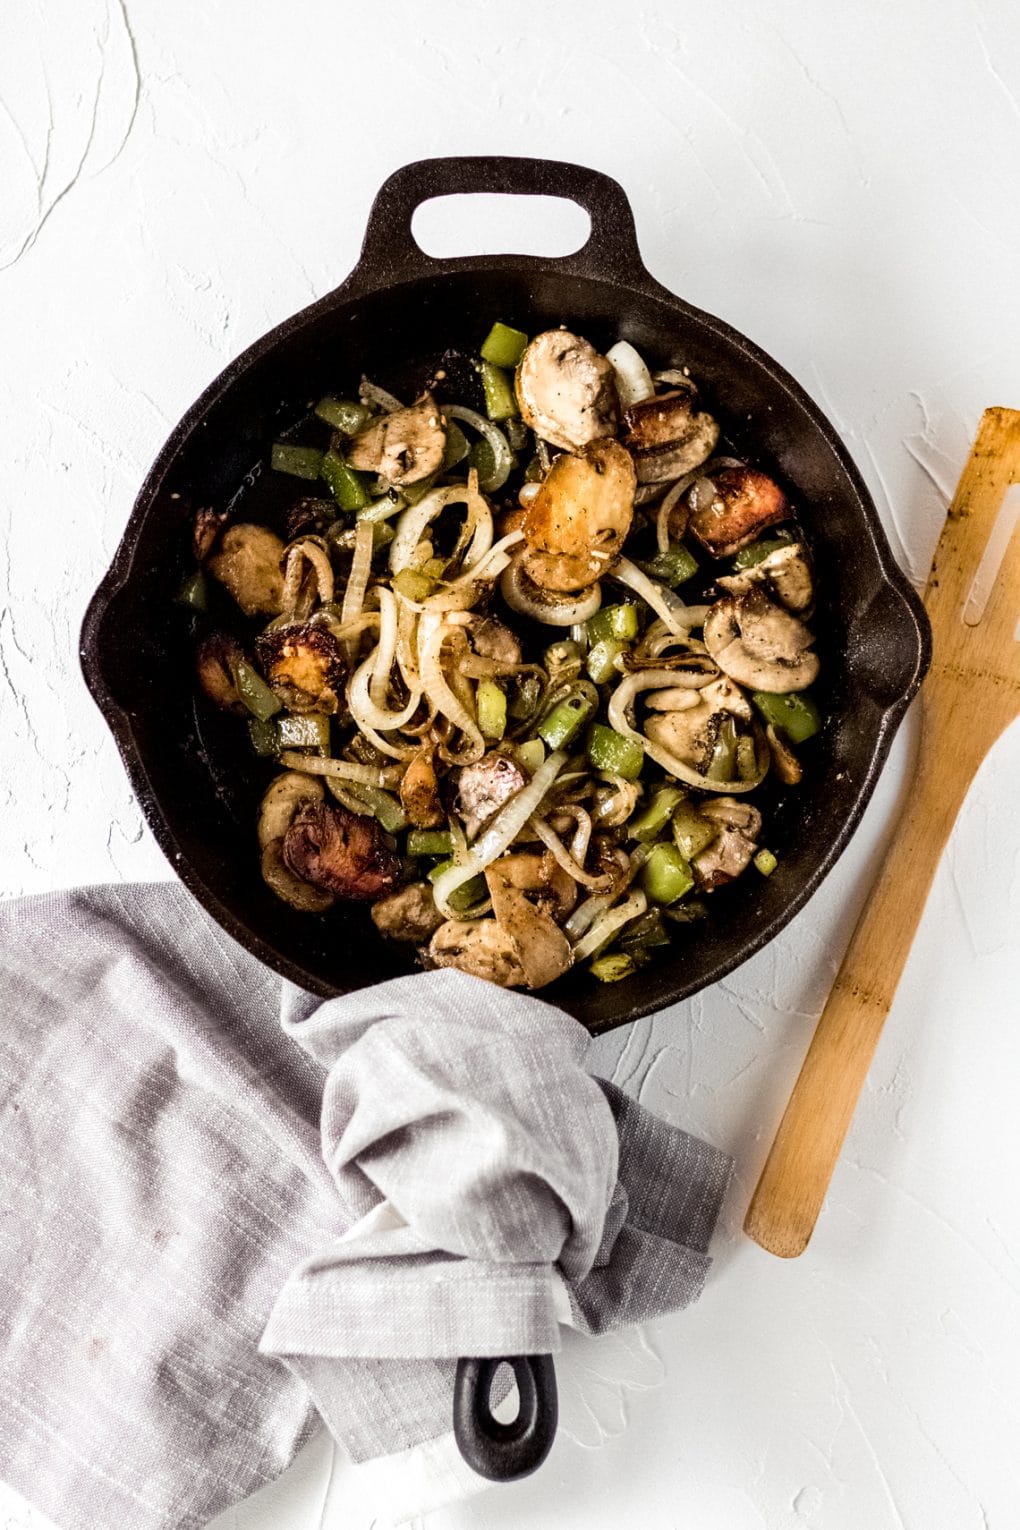 a cast iron skillet with sautéed mushrooms, onions, and green peppers